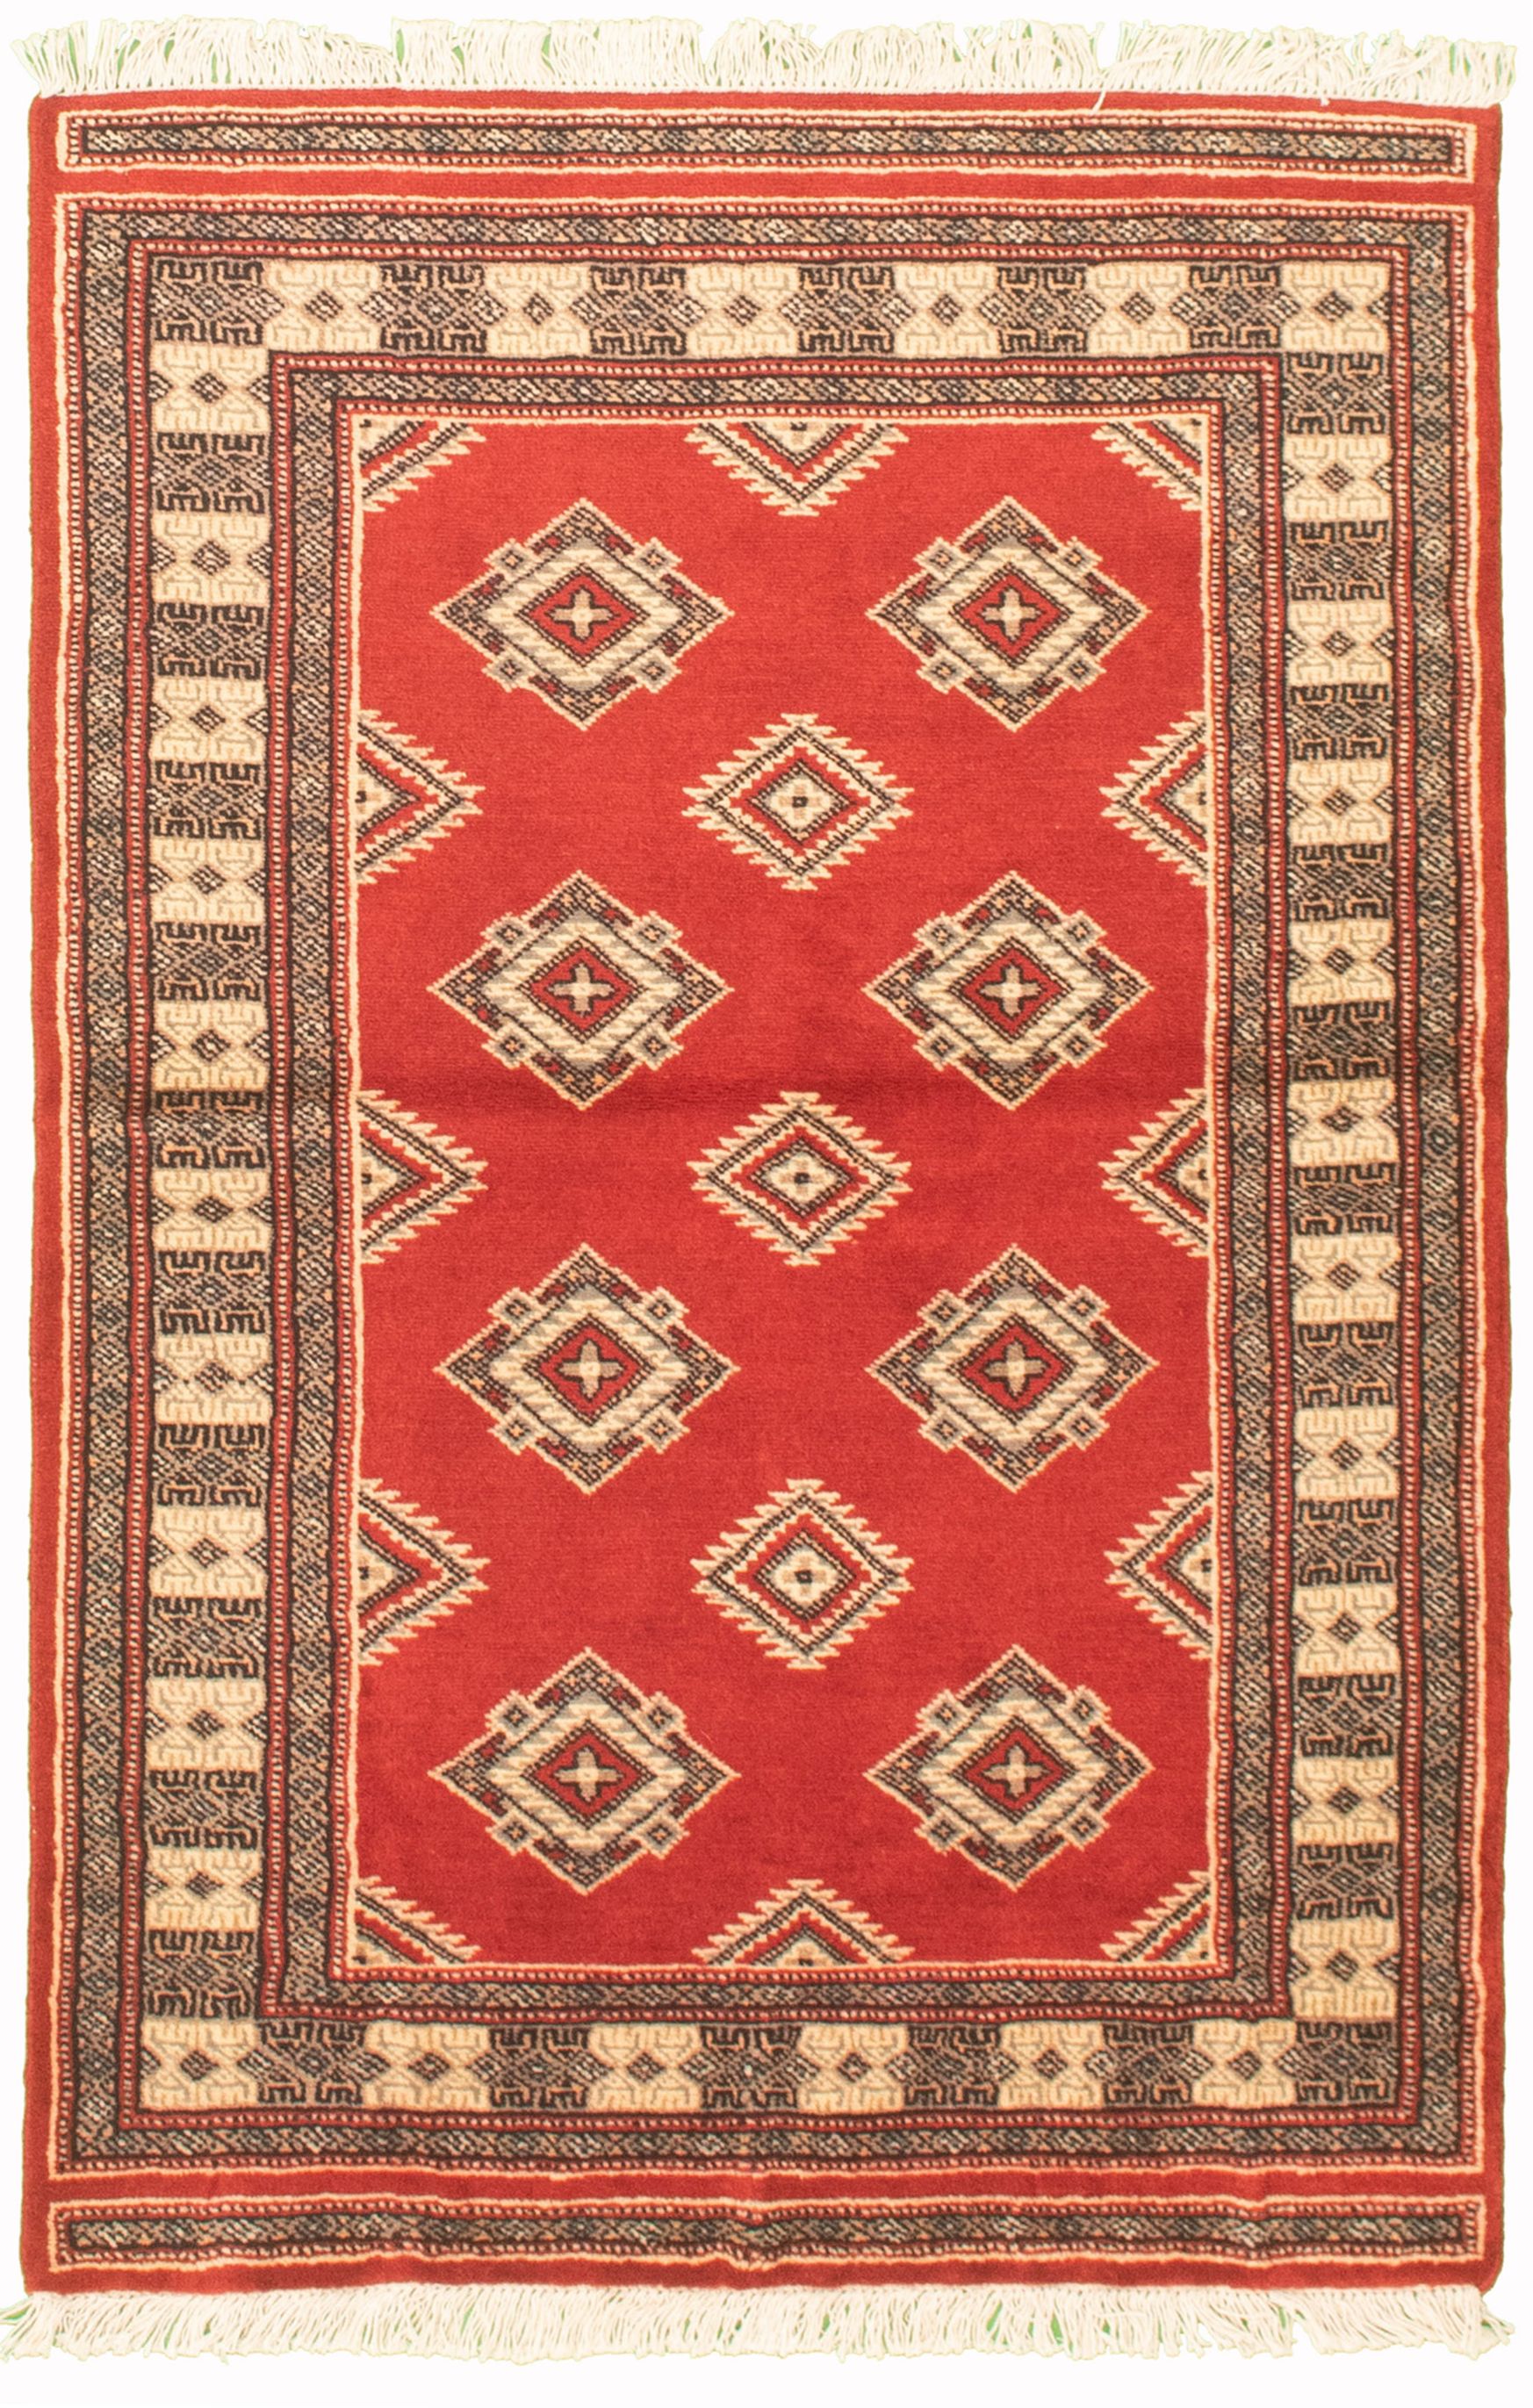 Hand-knotted Finest Peshawar Bokhara Red Wool Rug 3'1" x 5'0"  Size: 3'1" x 5'0"  